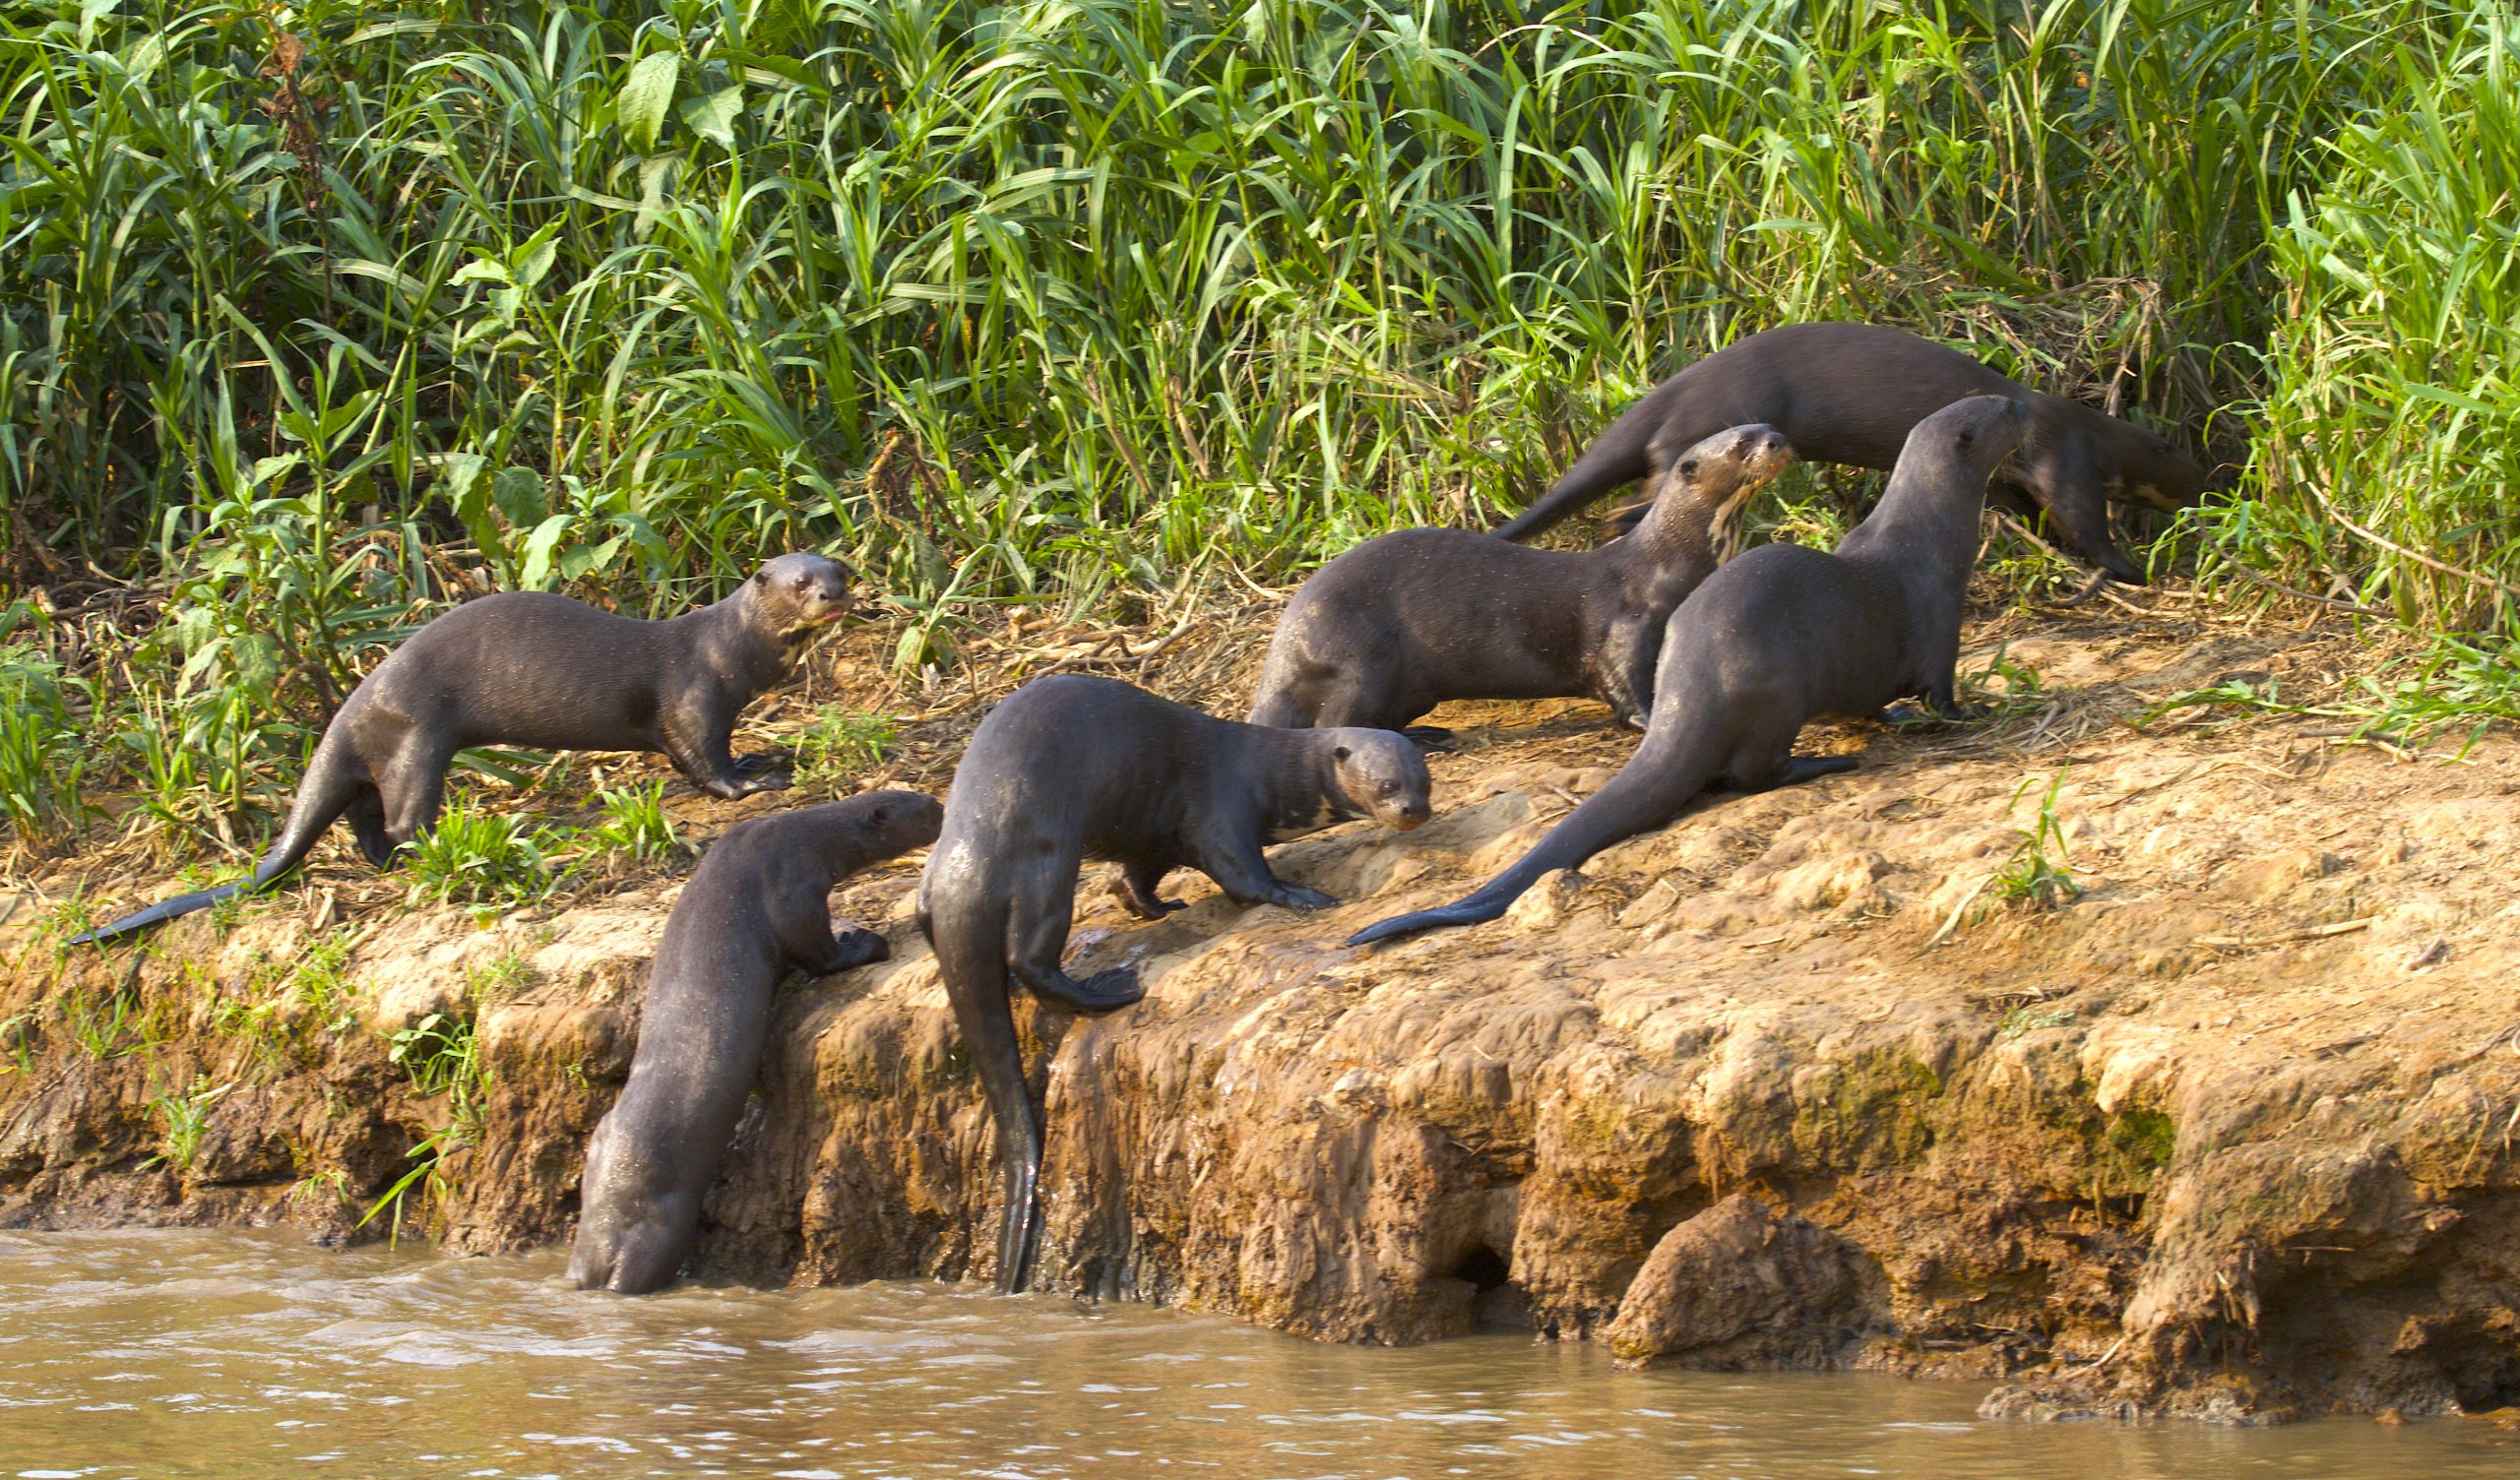 Giant river otters on bank of Cuiabá River, Pantanal, Brazil.